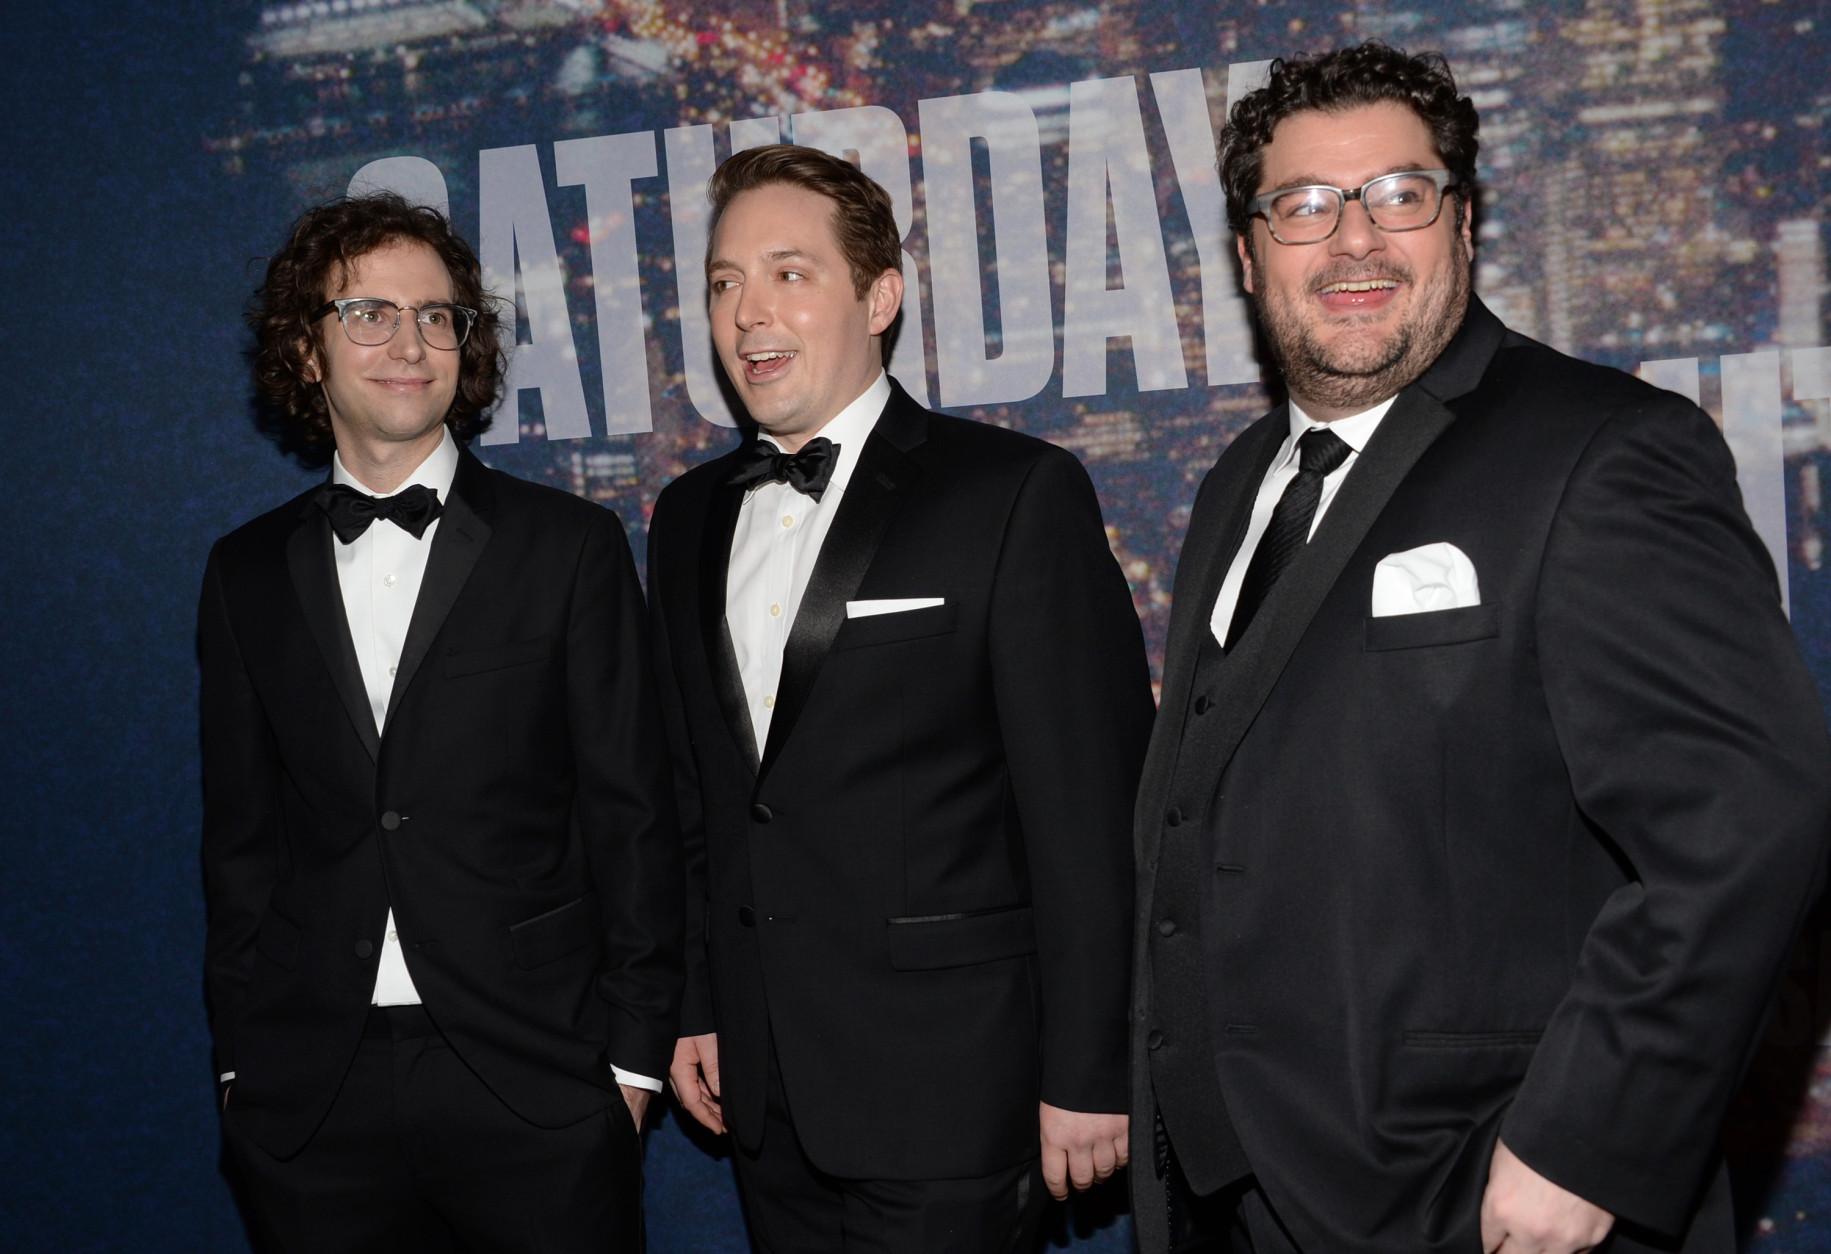 Kyle Mooney, from left, Beck Bennett and Bobby Moynihan arrive at the Saturday Night Live 40th Anniversary Special at Rockefeller Plaza on Sunday, Feb. 15, 2015, in New York. (Photo by Evan Agostini/Invision/AP)